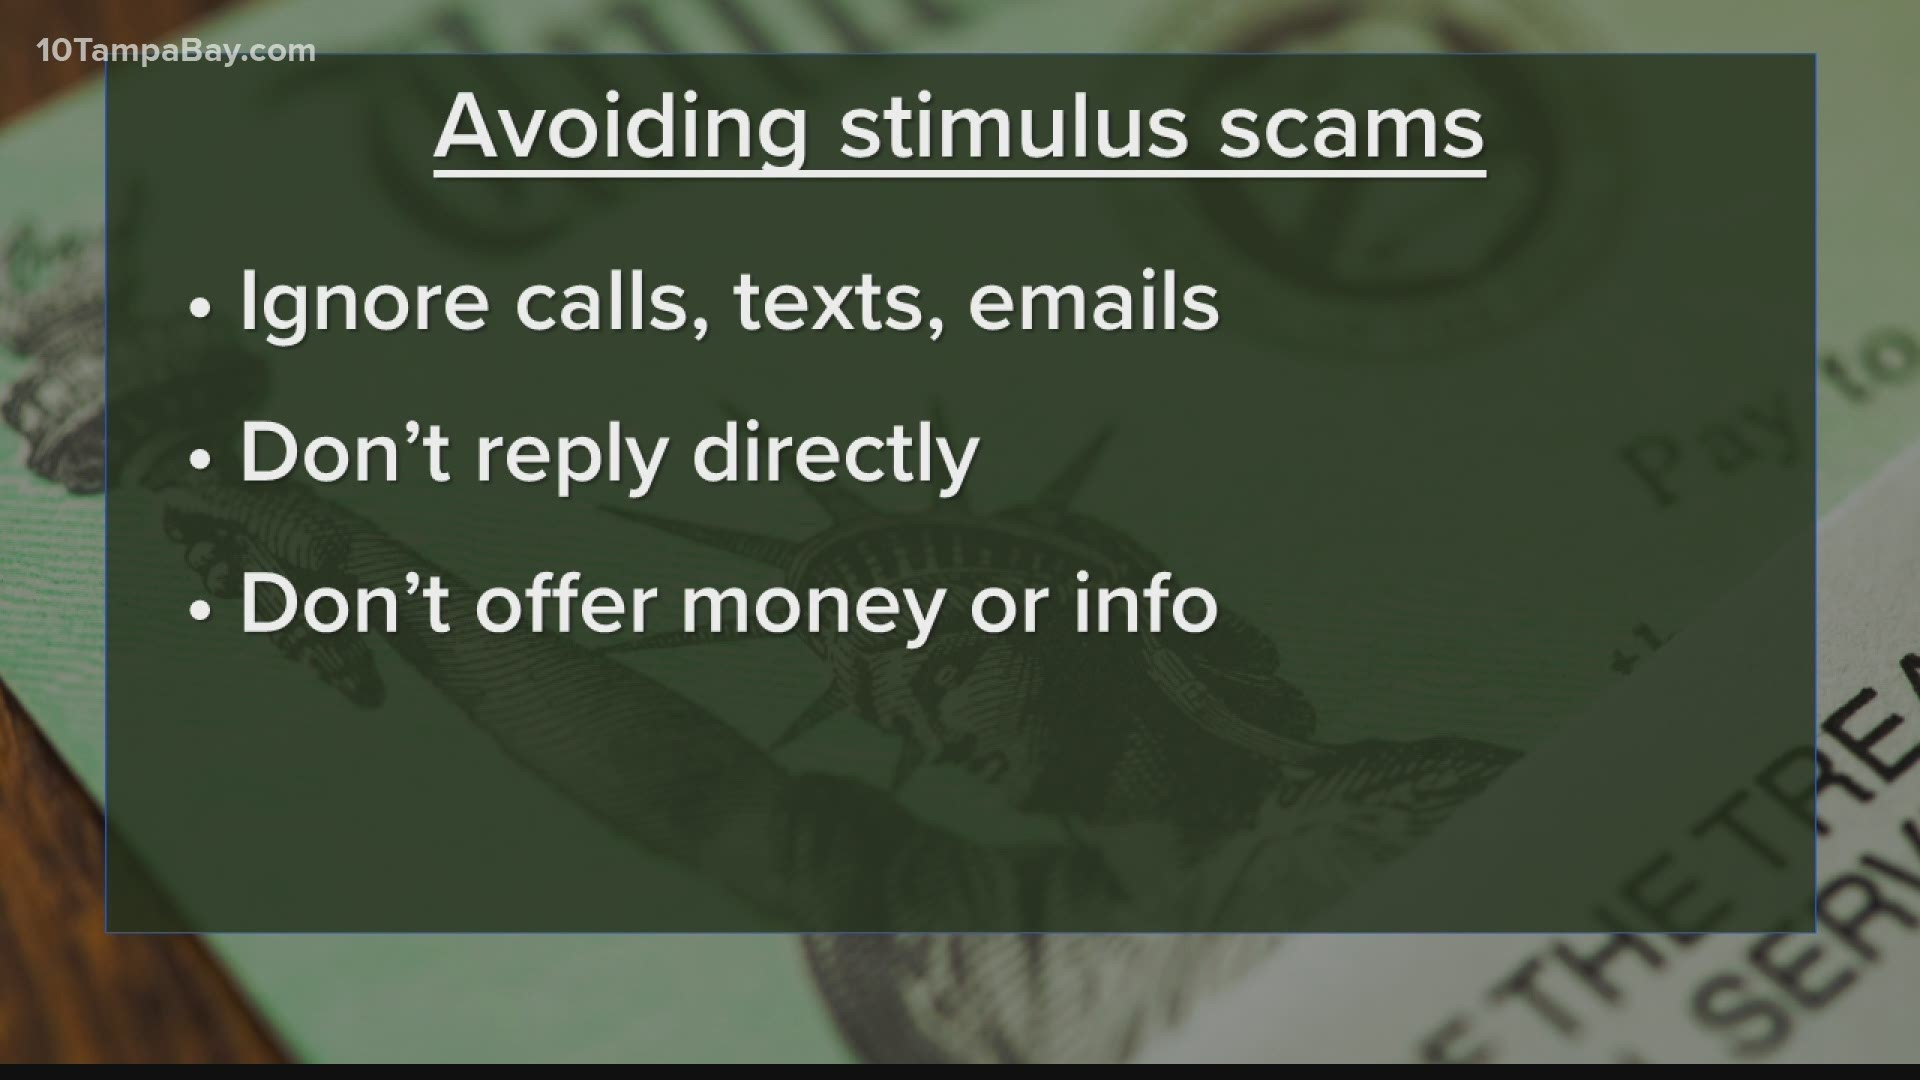 More than $360 million have been lost in stimulus payment related scams over the past year.